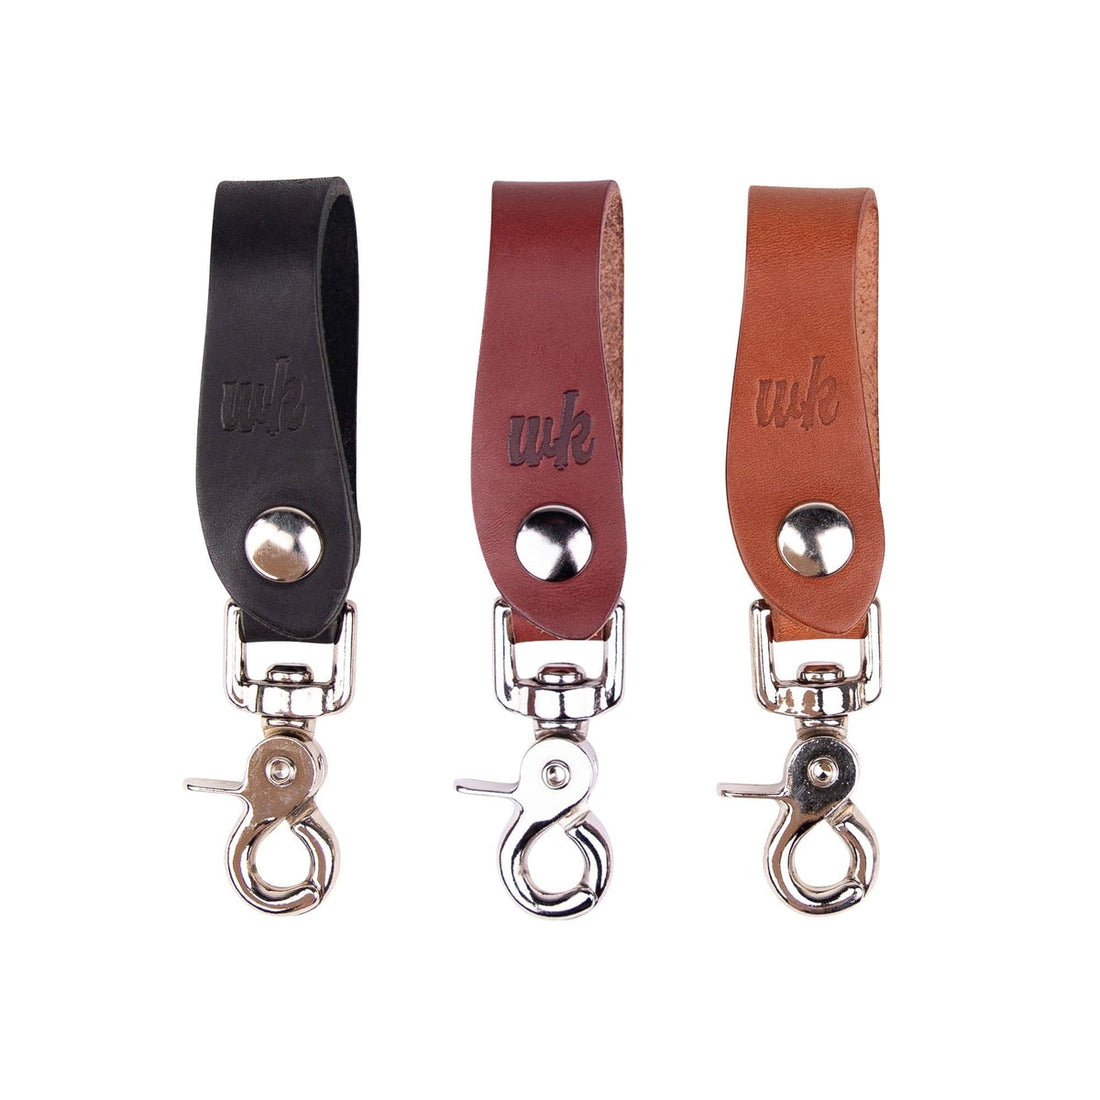 Made in the USA Spotlight: Whiteknuckler Brand Leather Key Hanger and Fob